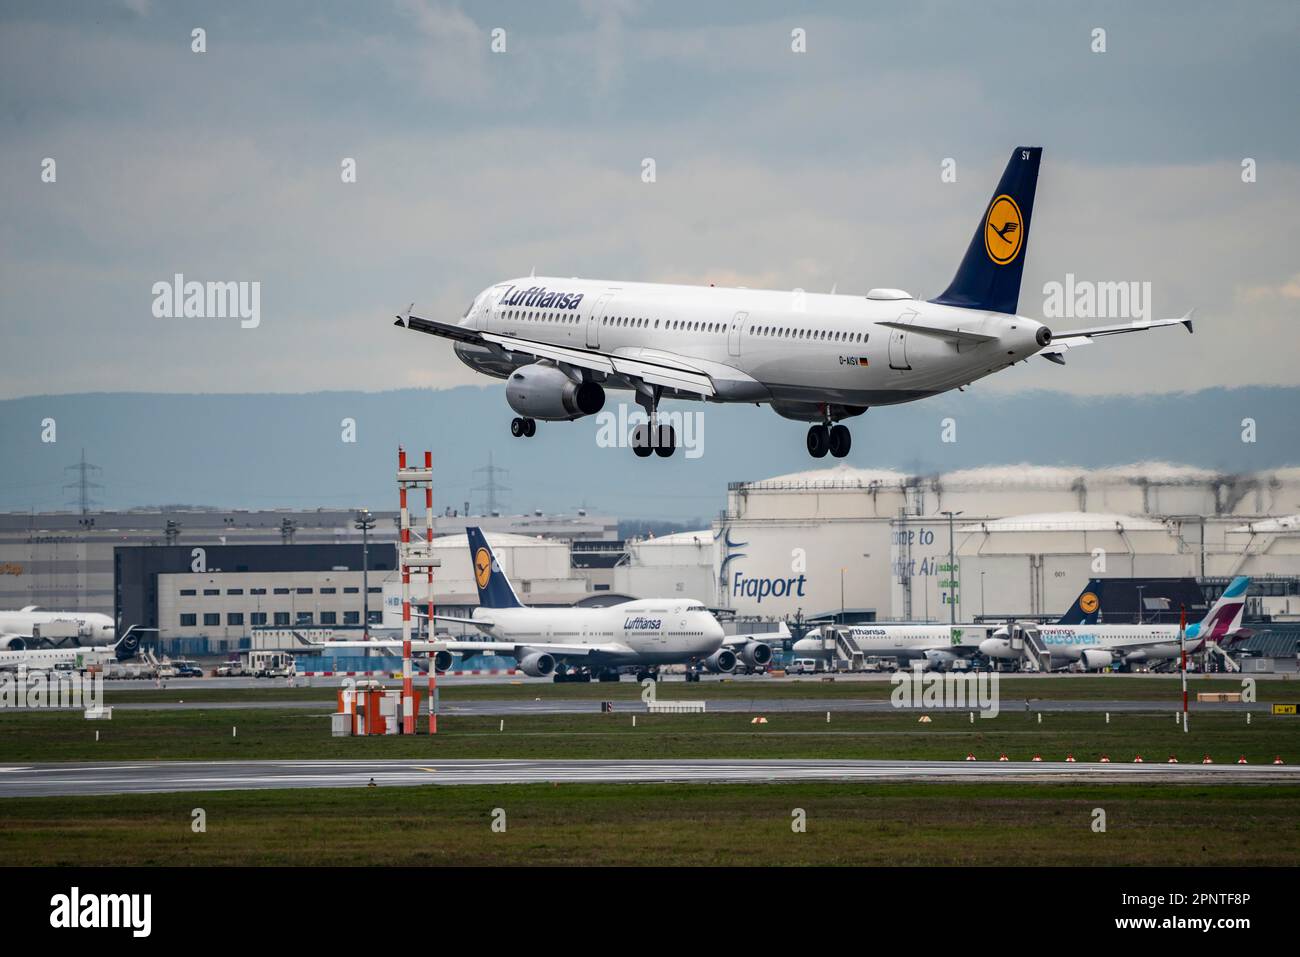 Lufthansa Airbus A321, D-AISV, approaching Frankfurt Airport, fuel depot, aviation fuel, FRA, Hesse, Germany, Stock Photo